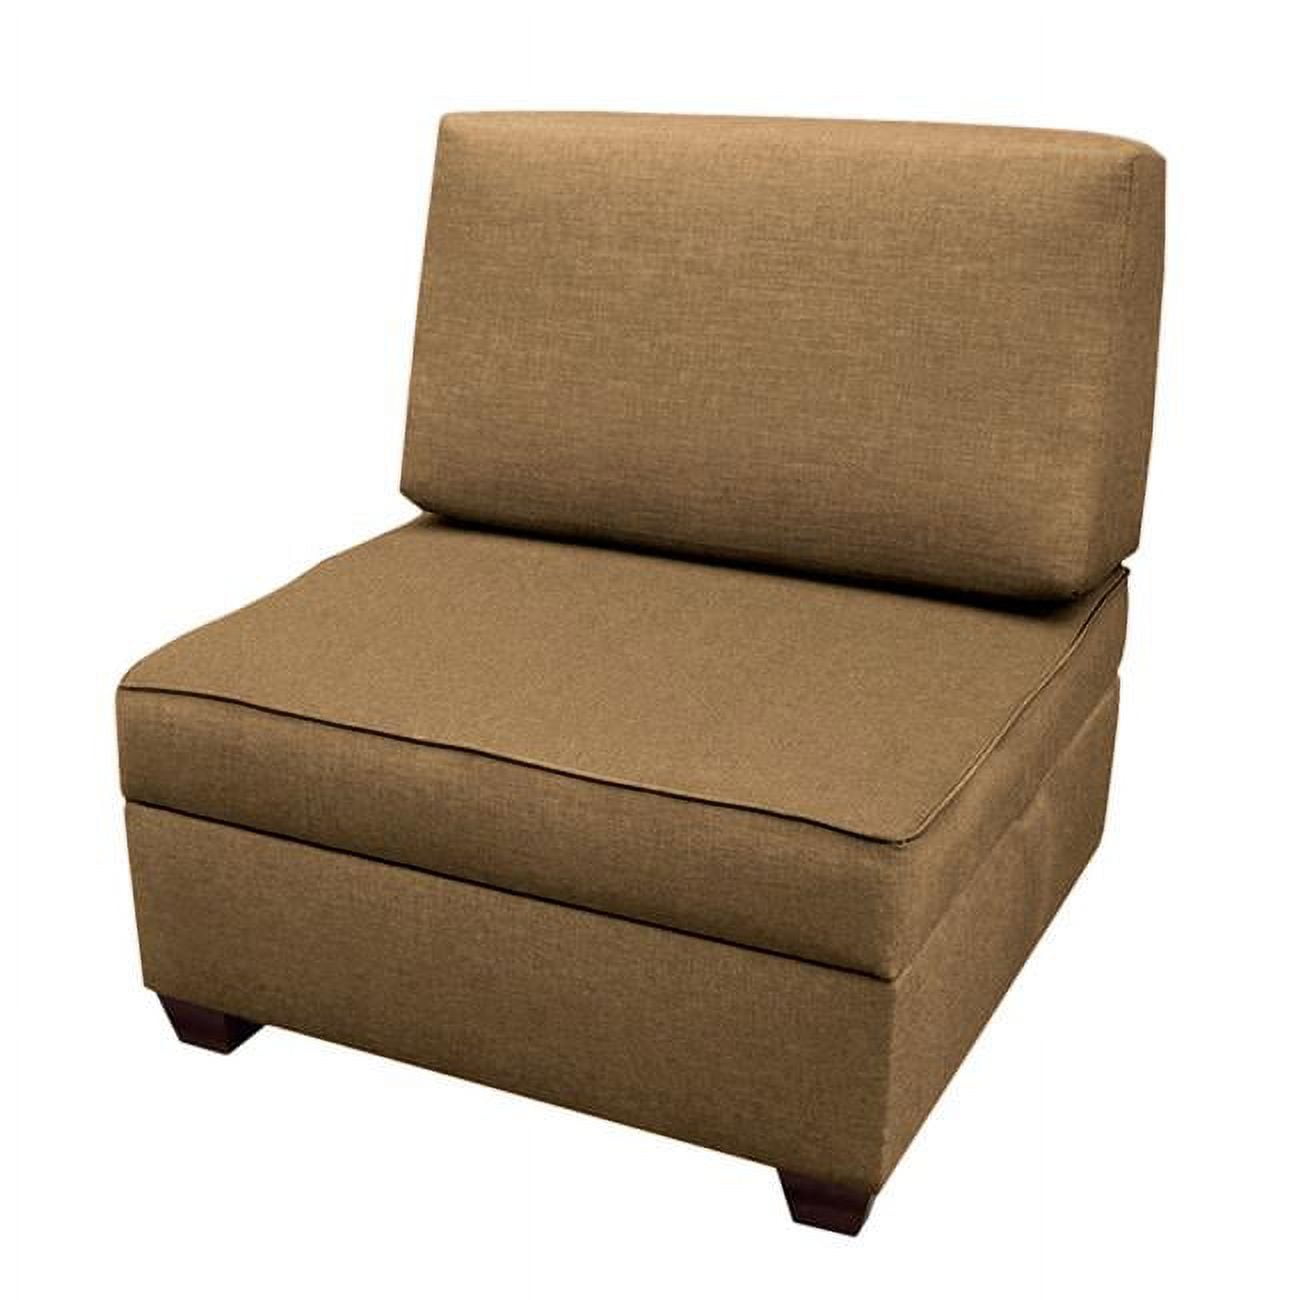 Mfch-bs 36 In. Chair Plus 1 Bs Storage Ottomans - Mocha